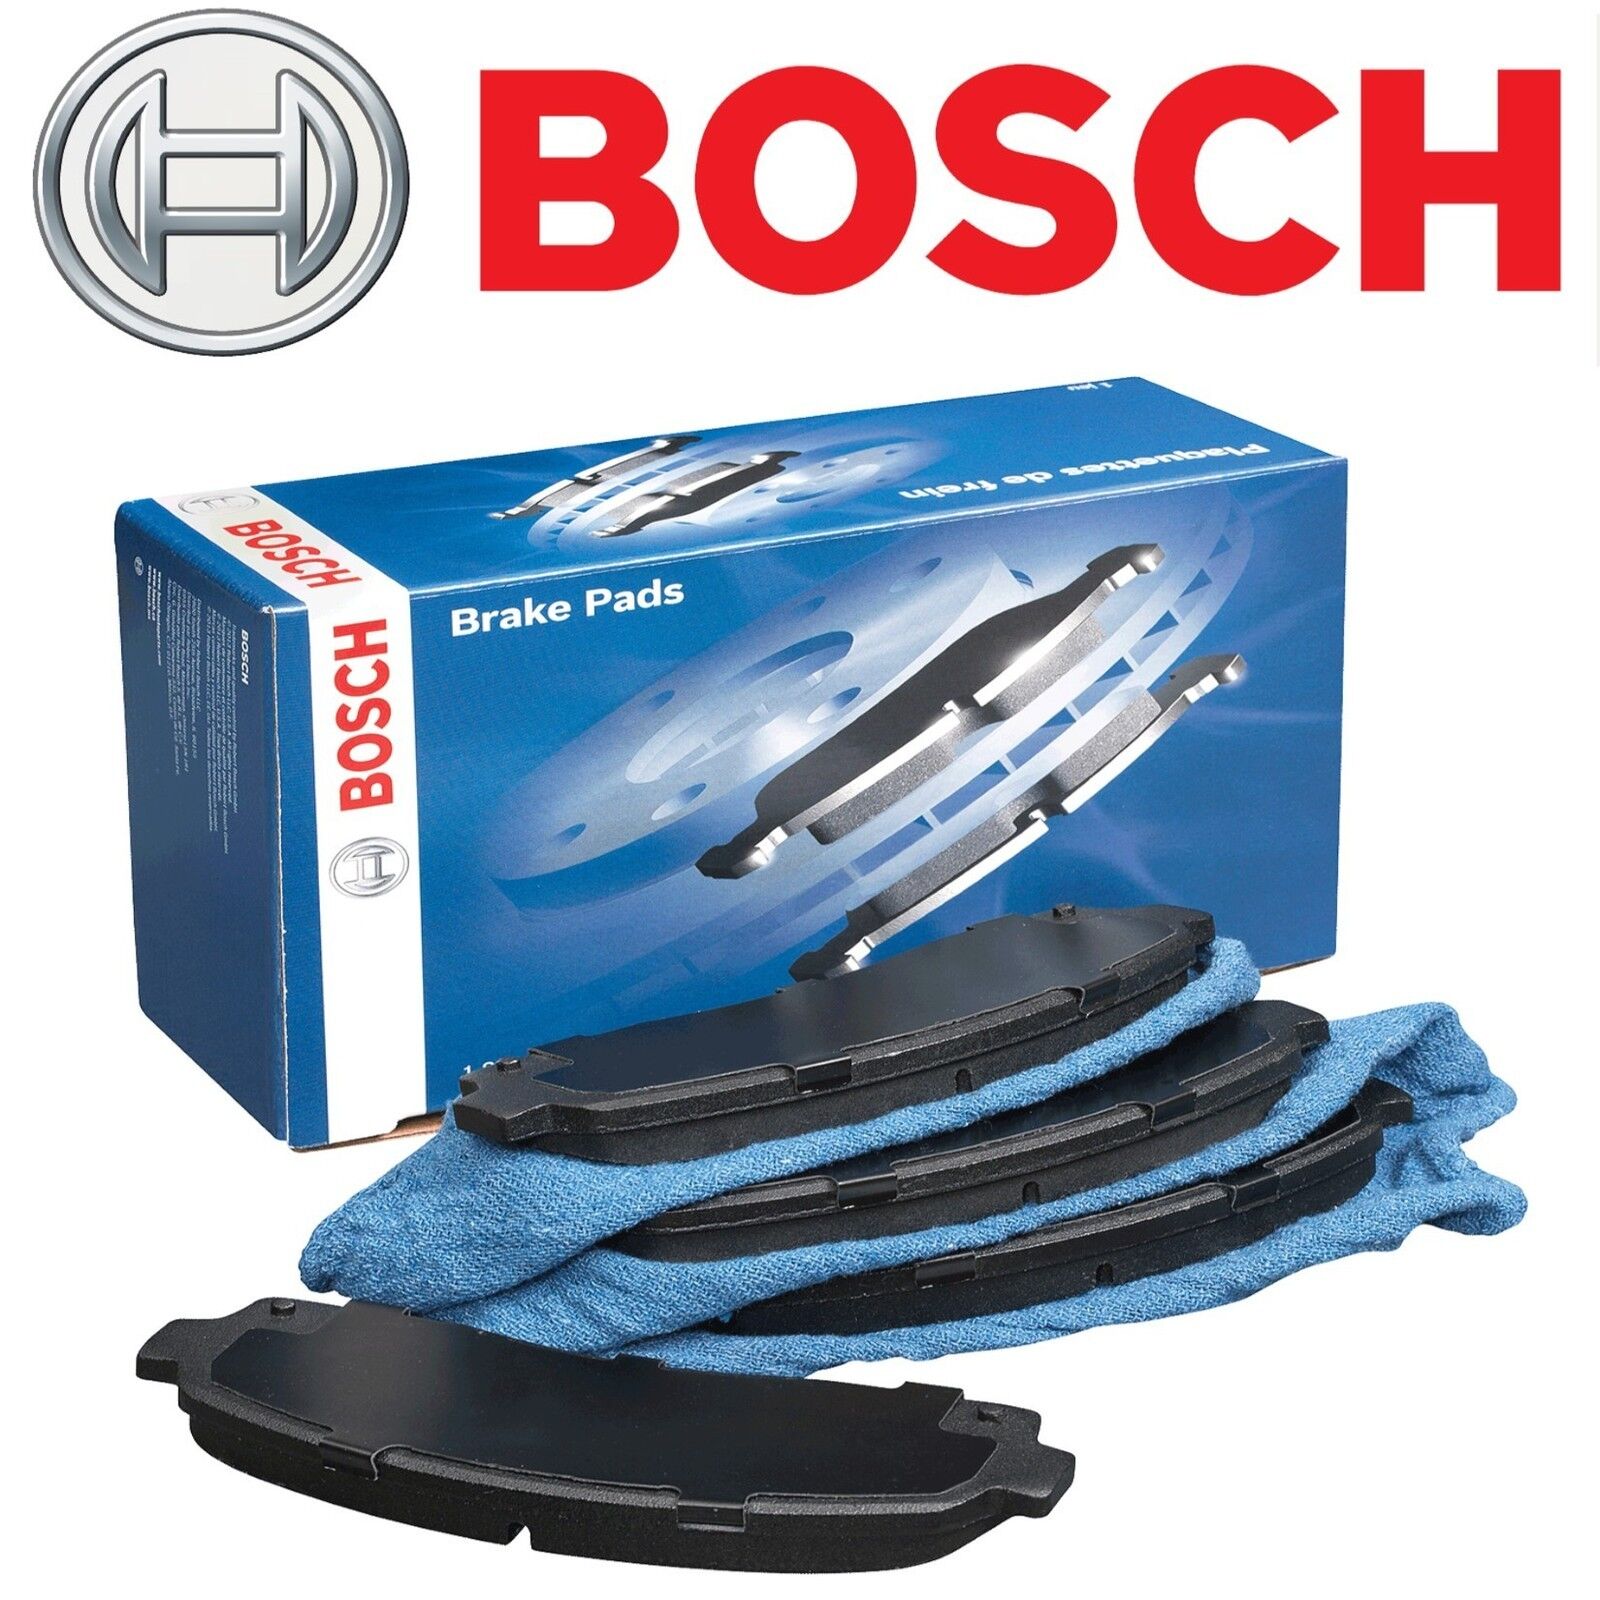 Bosch BE1001 Bosch Brake Pad Sets 2-Wheel Set Front New Chevy Ford Mustang